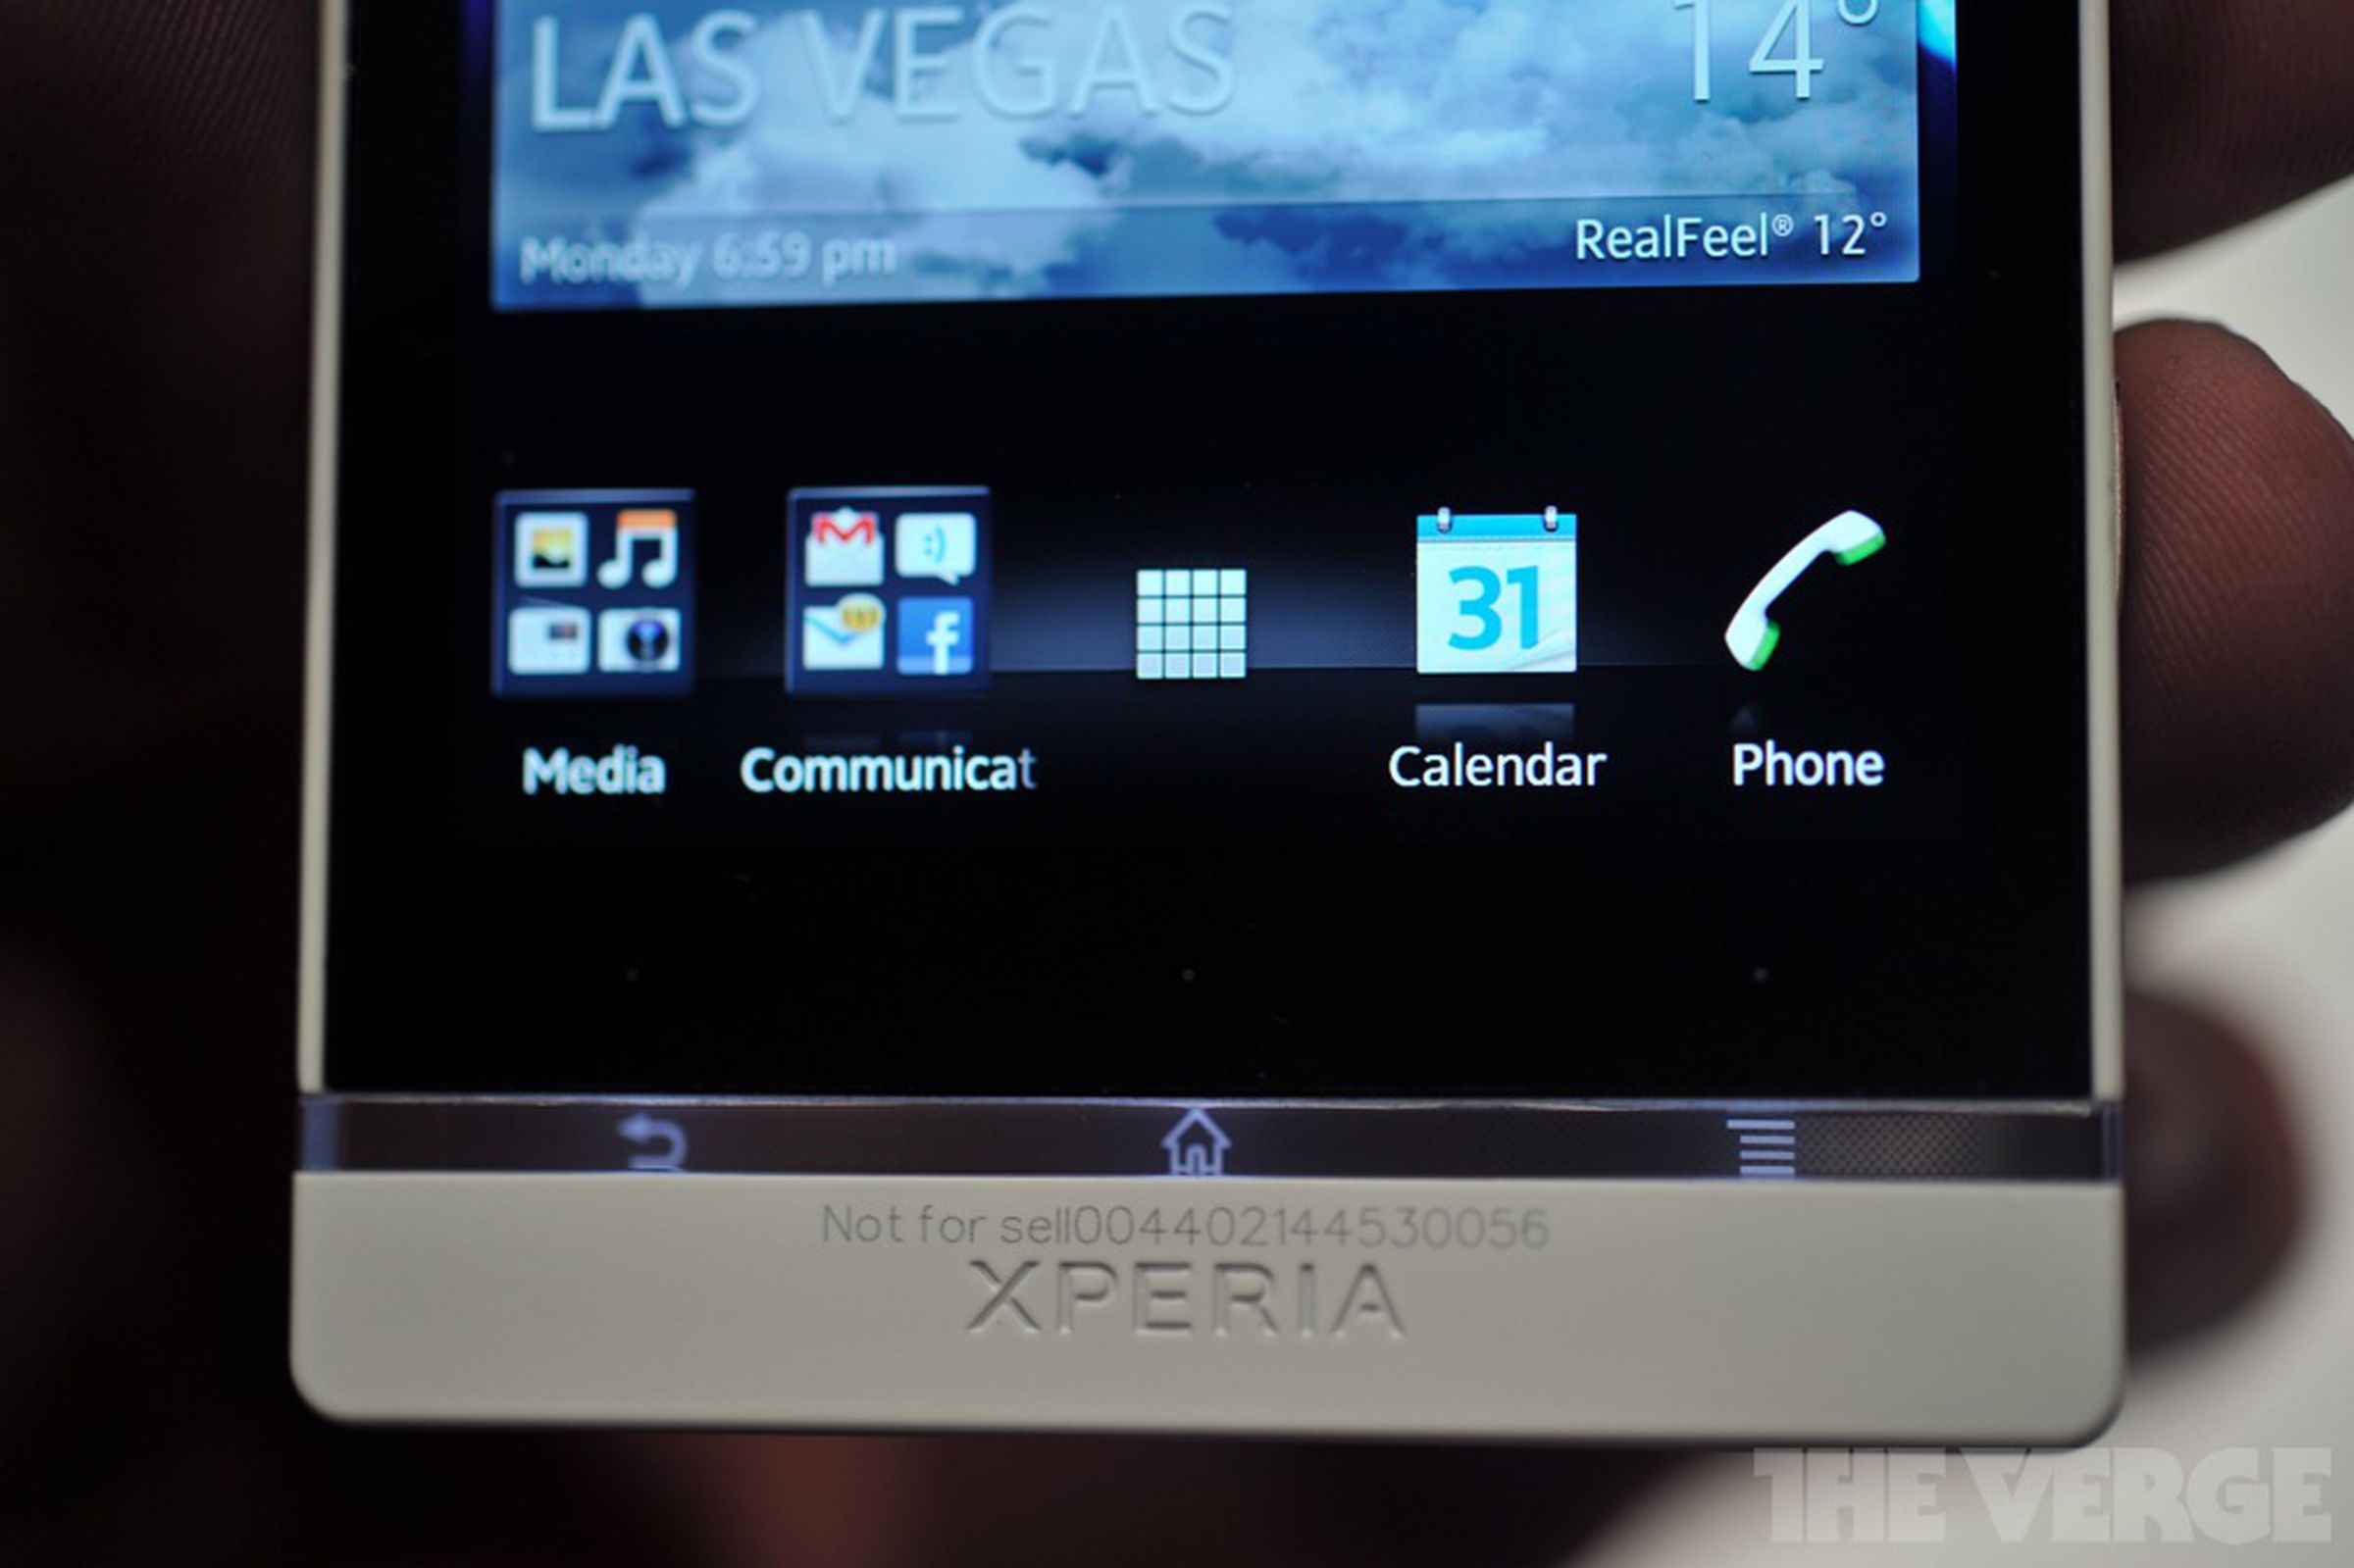 Sony Xperia S hands-on (update: more pictures)